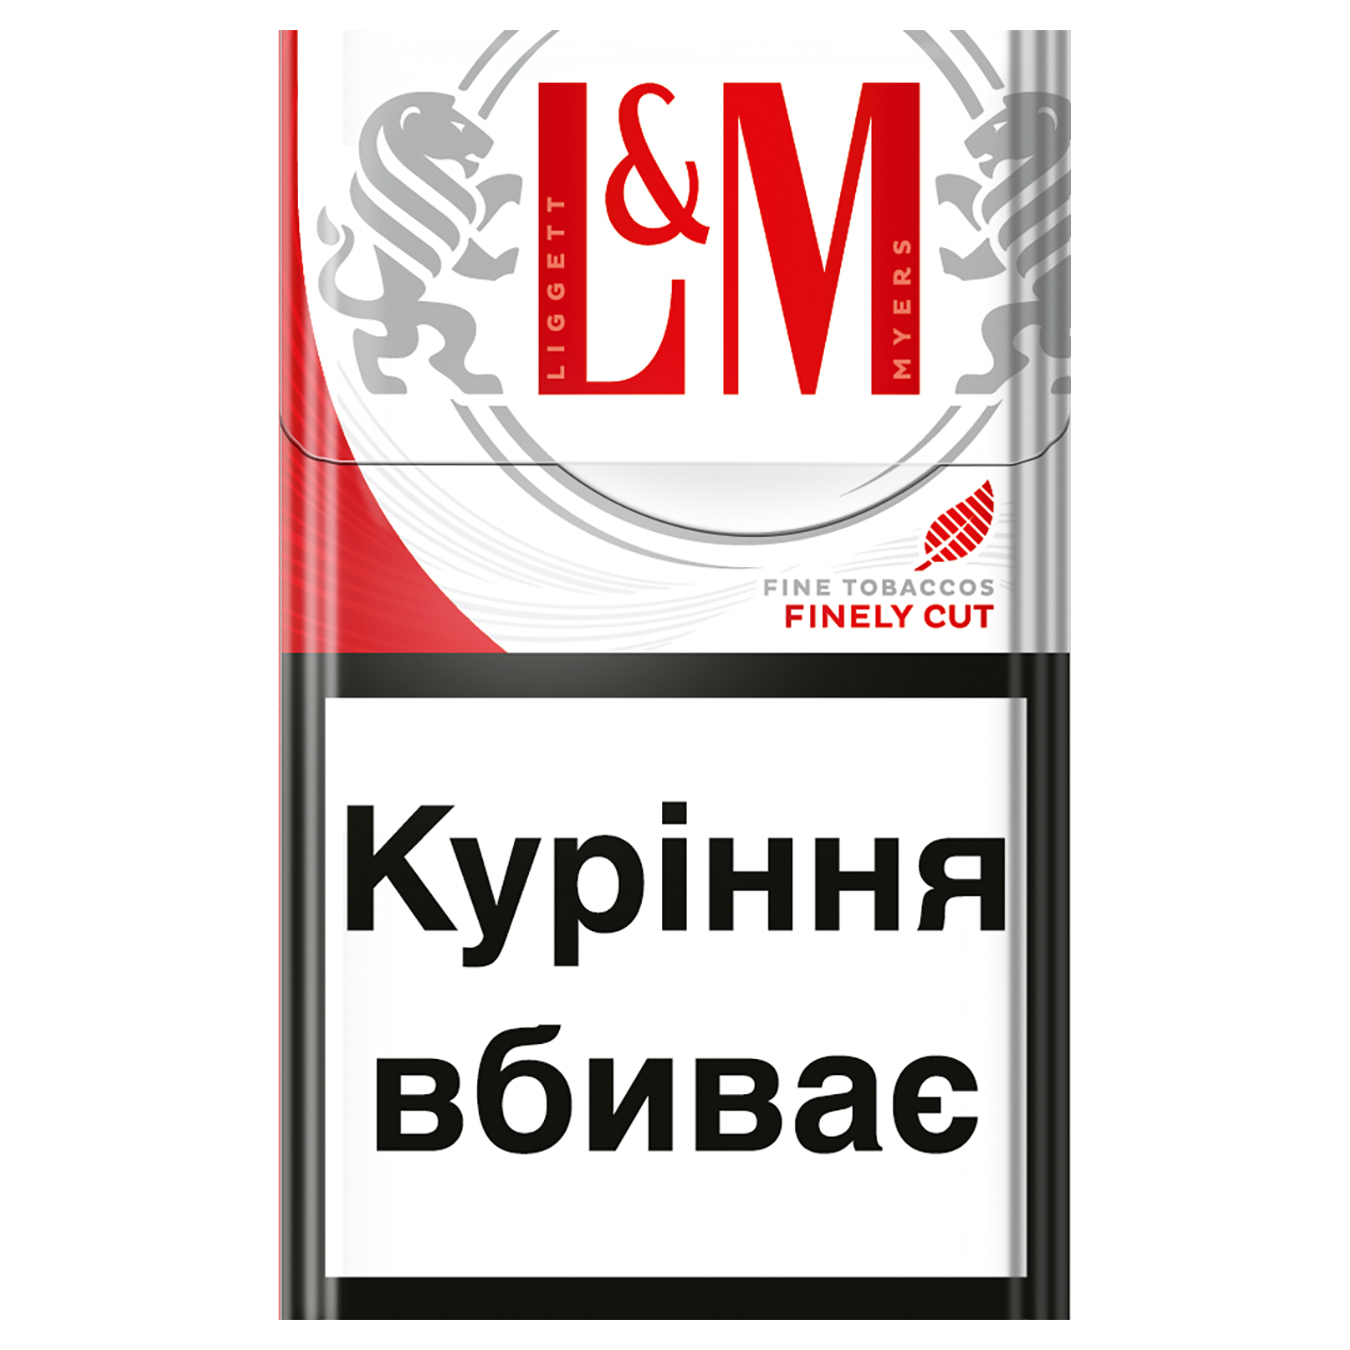 L&M Red Label Cigarettes 20pcs (the price is indicated without excise tax)